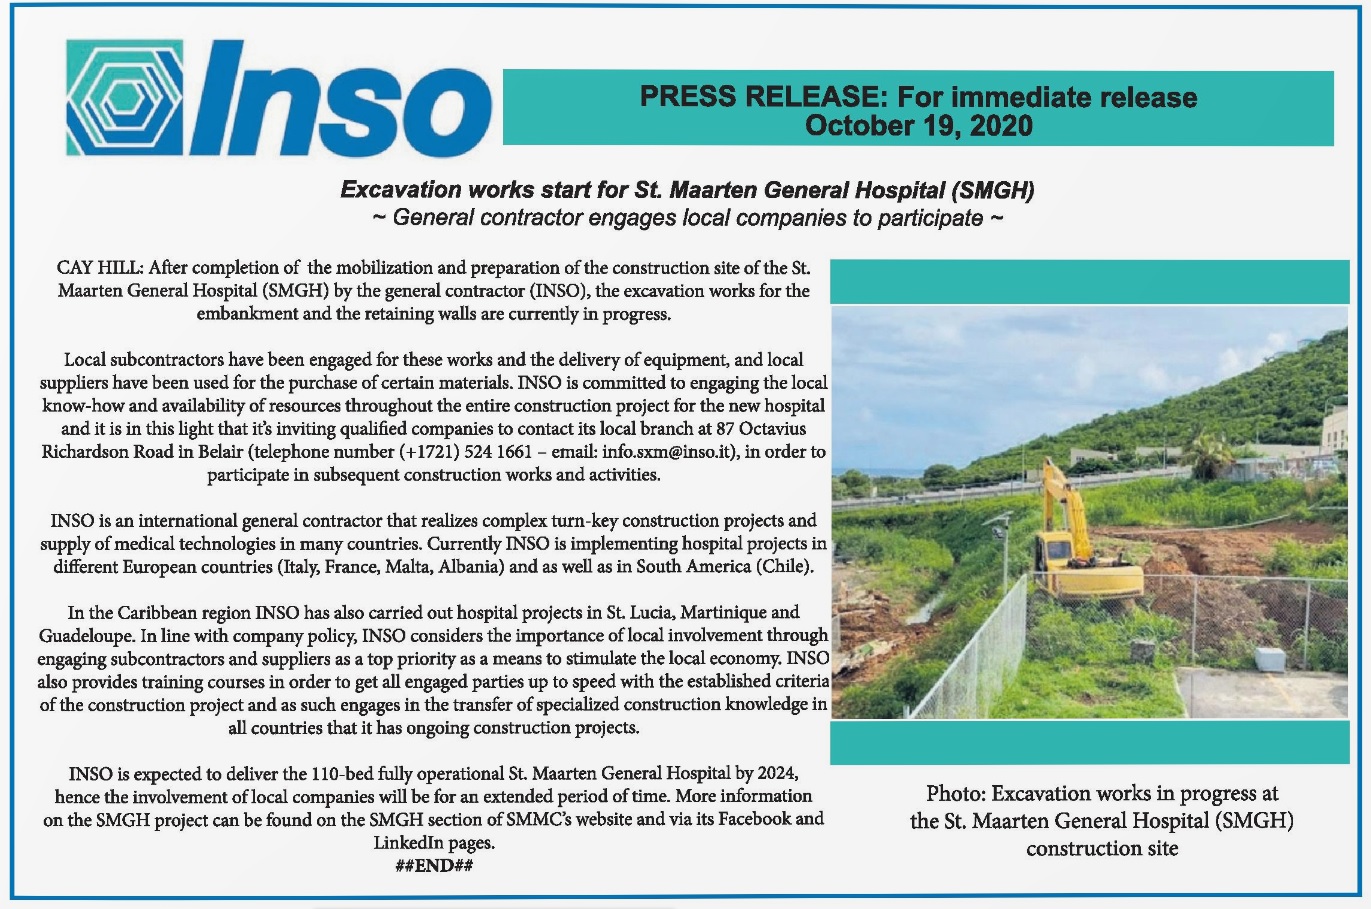 Press Release by INSO - Excavation works start for St. Maarten General Hospital (SMGH)